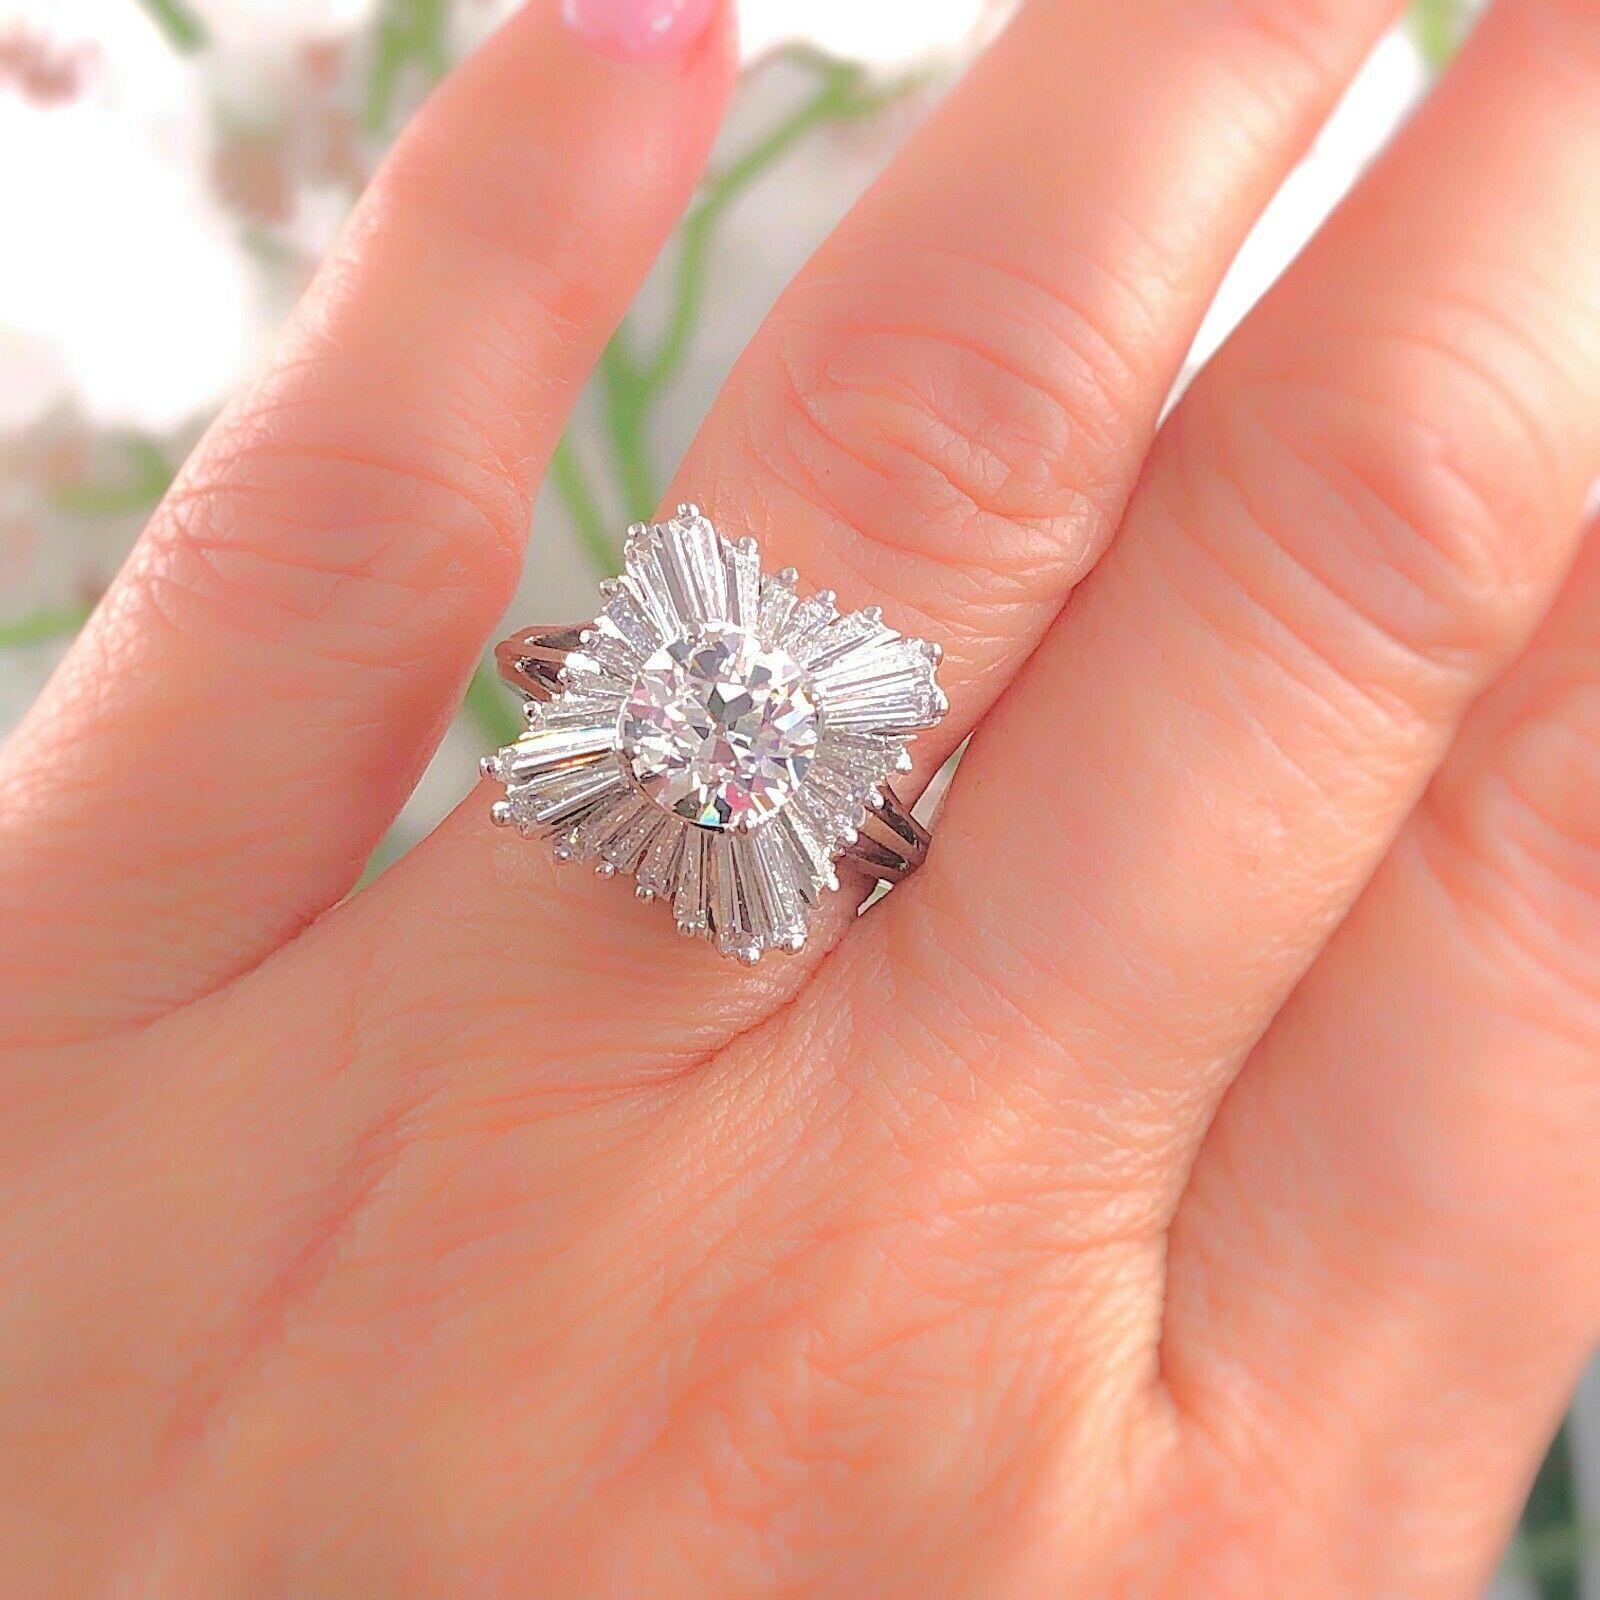 Old Mine Cut Old Cut Diamond 3.56 Carat Ballerina Ring with Tapered Baguettes in Platinum